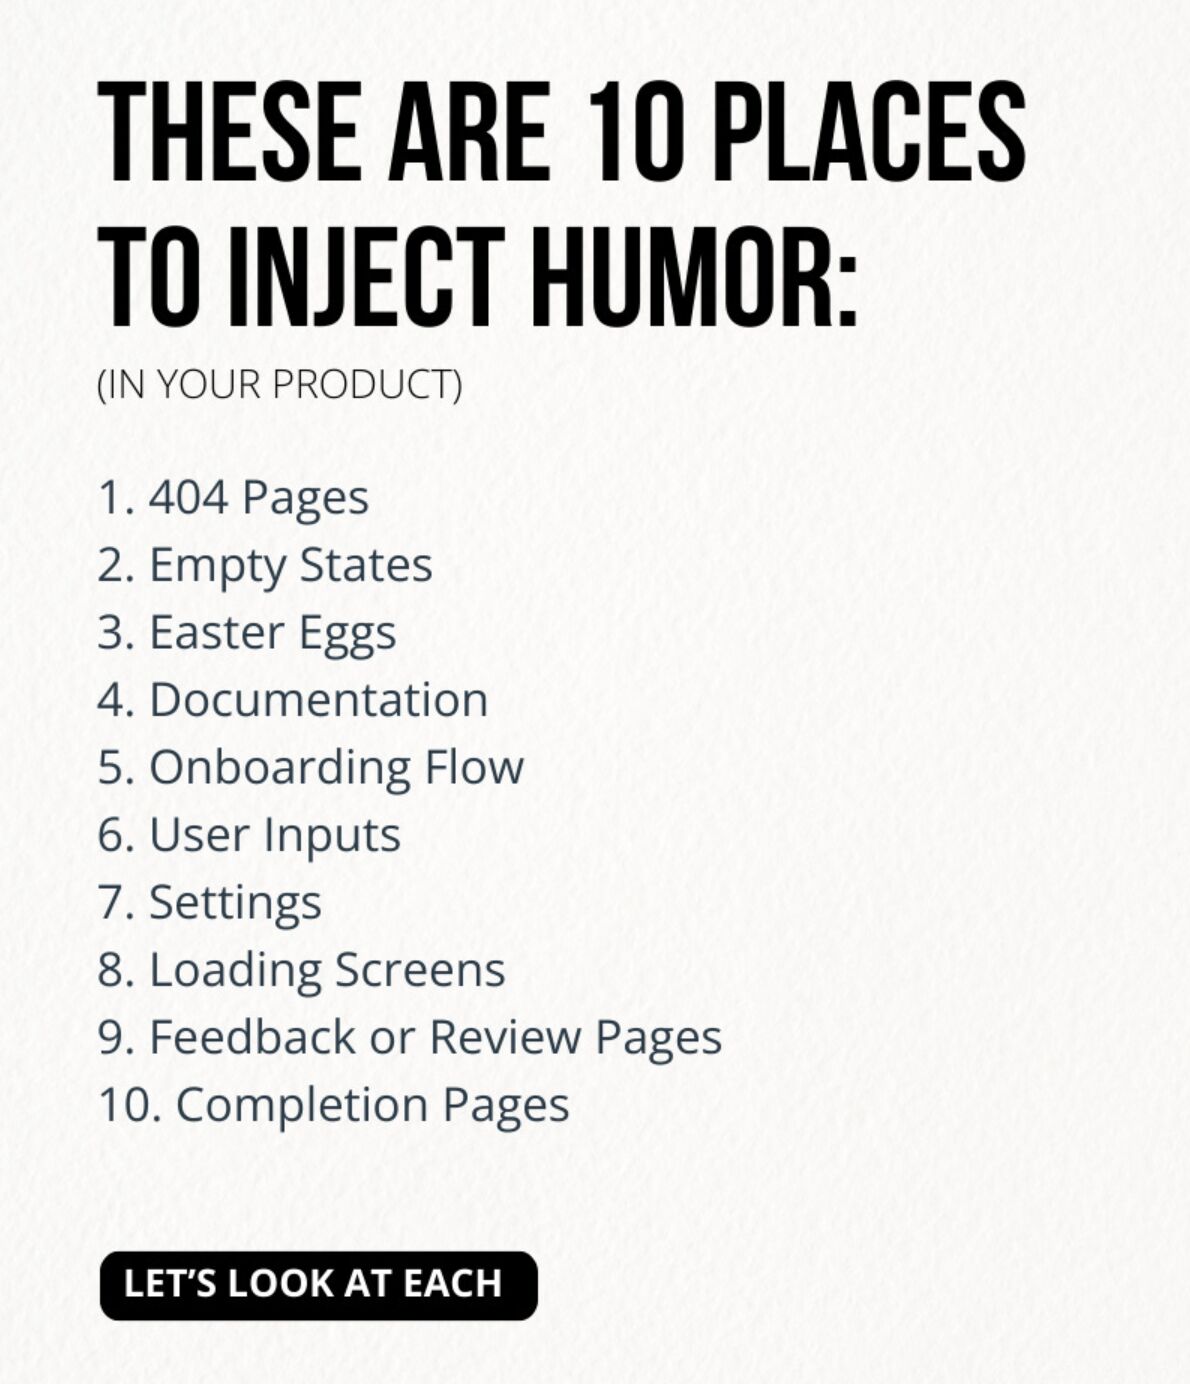 10 places to inject humor (2 minute read)